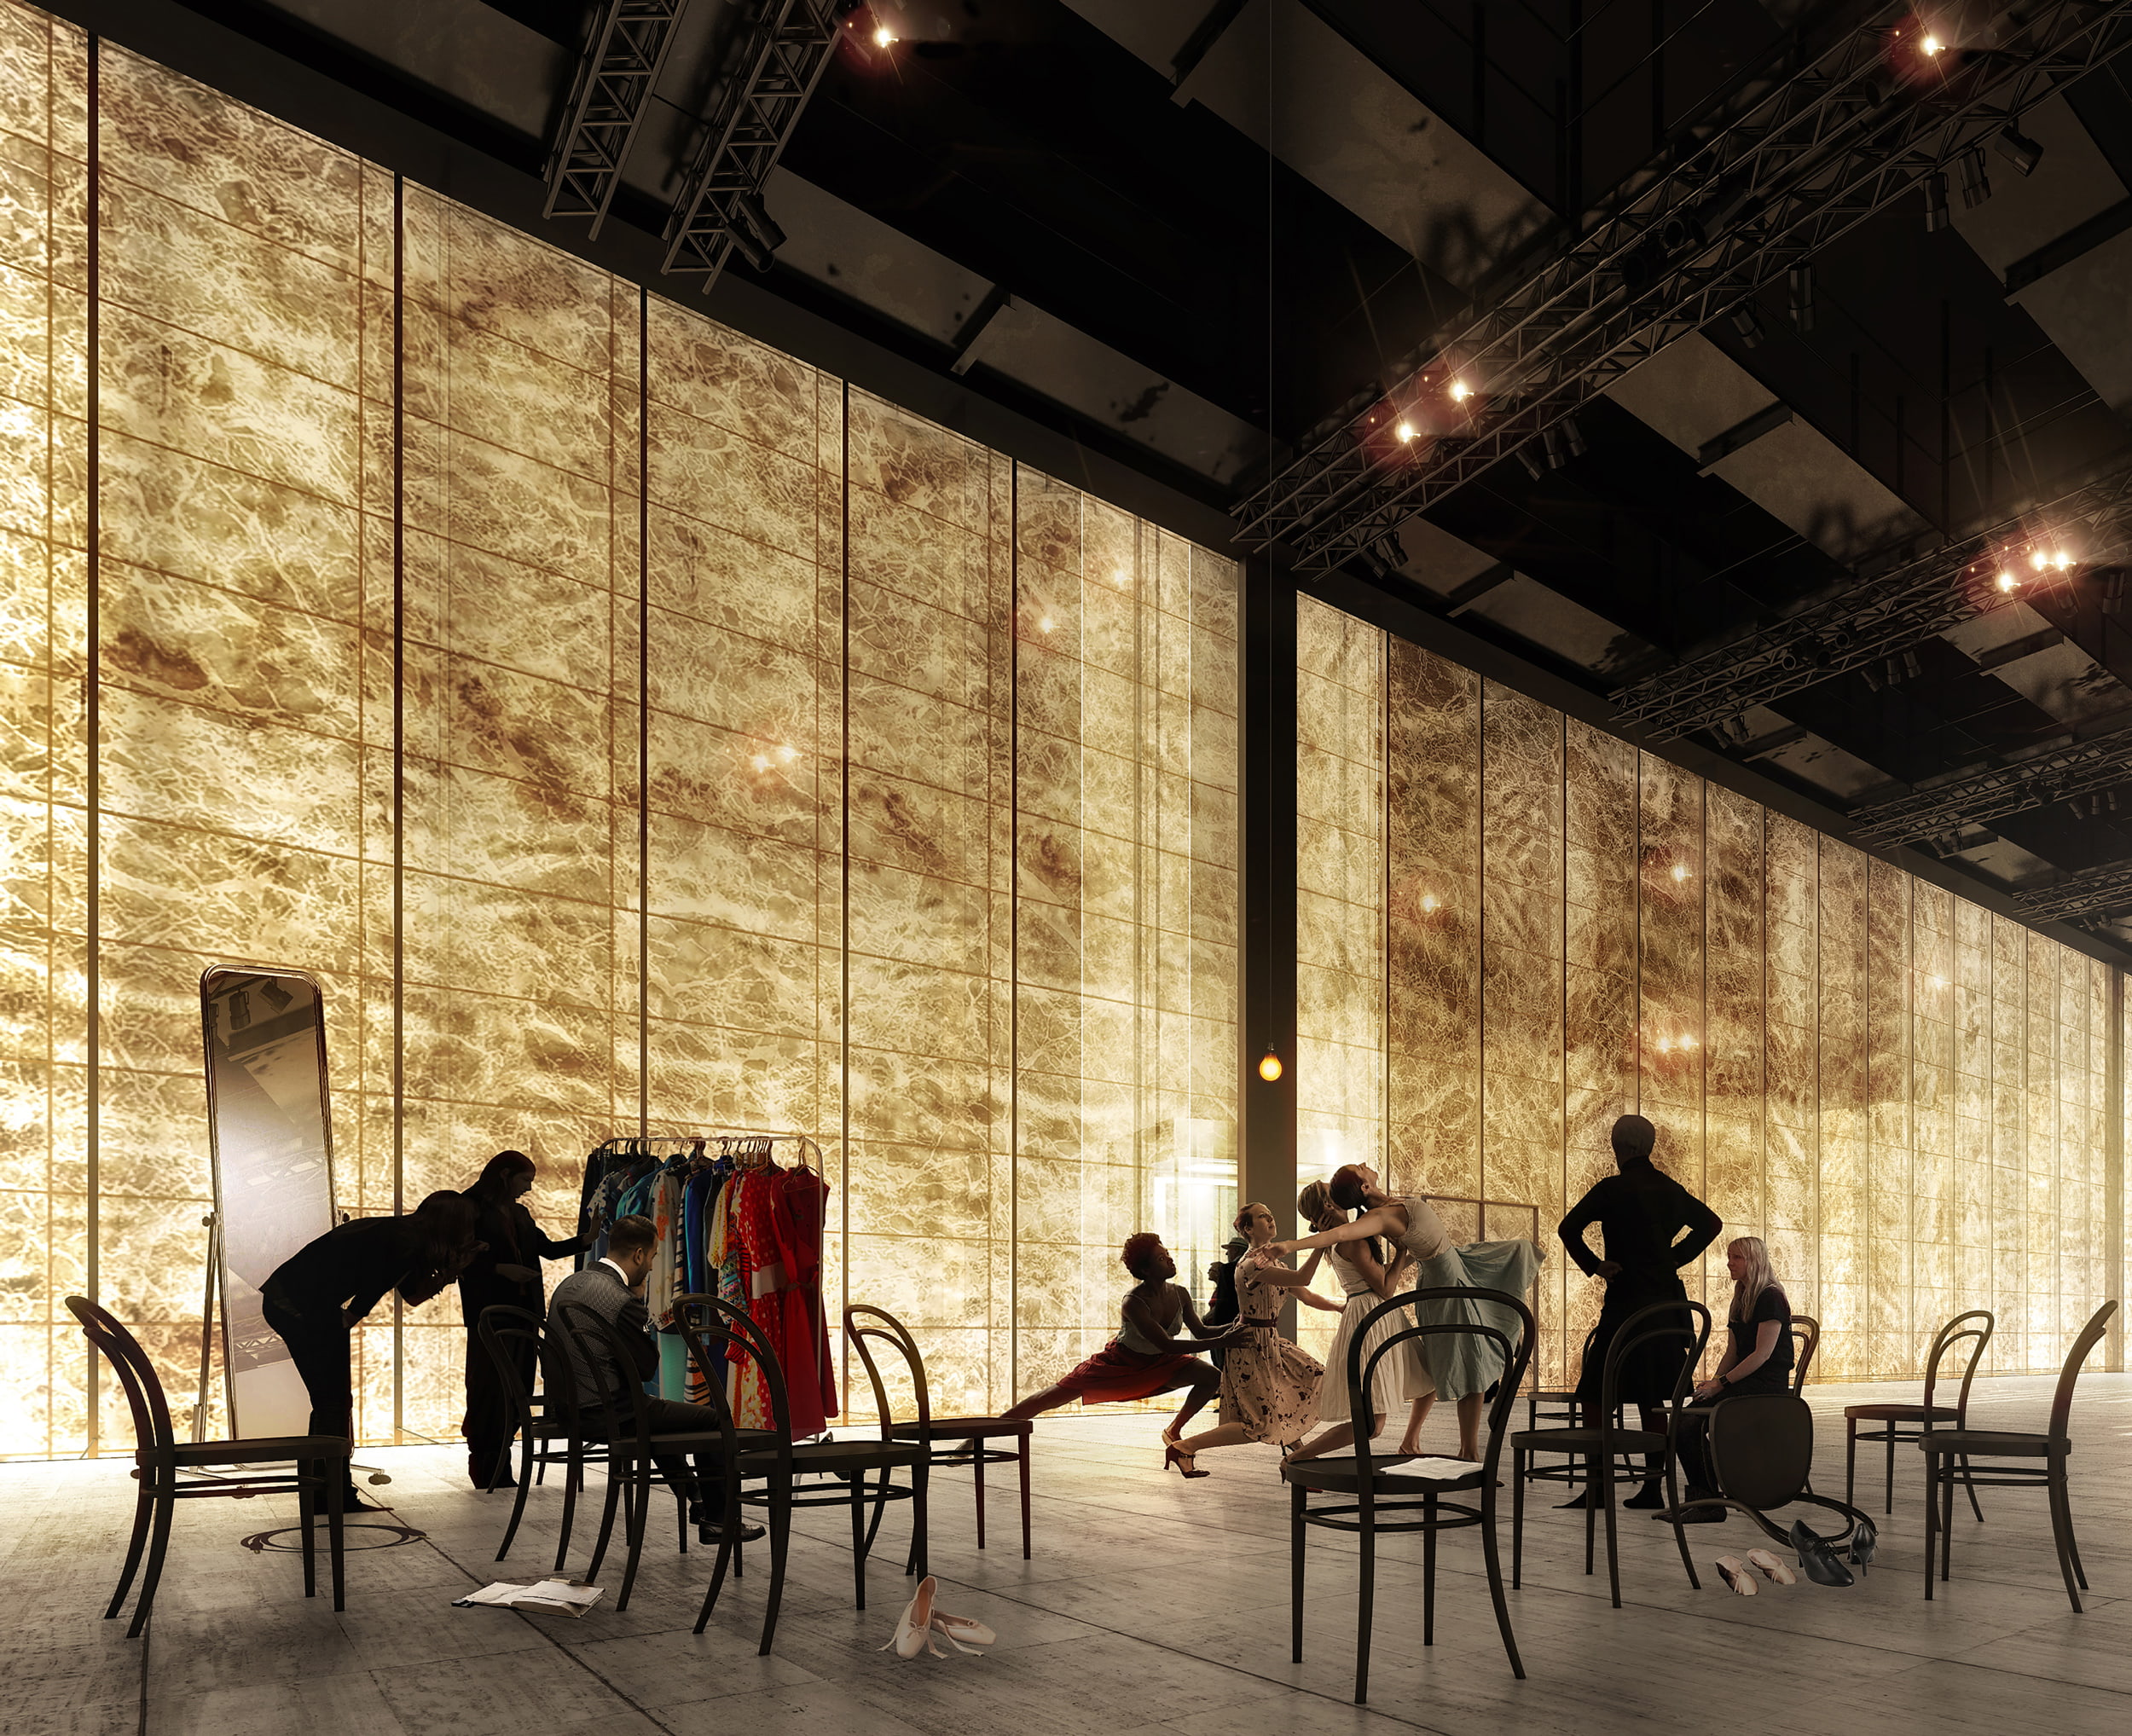 A visualization of the rehearsal room of The Perelman Performing Arts Center at the World Trade Center.